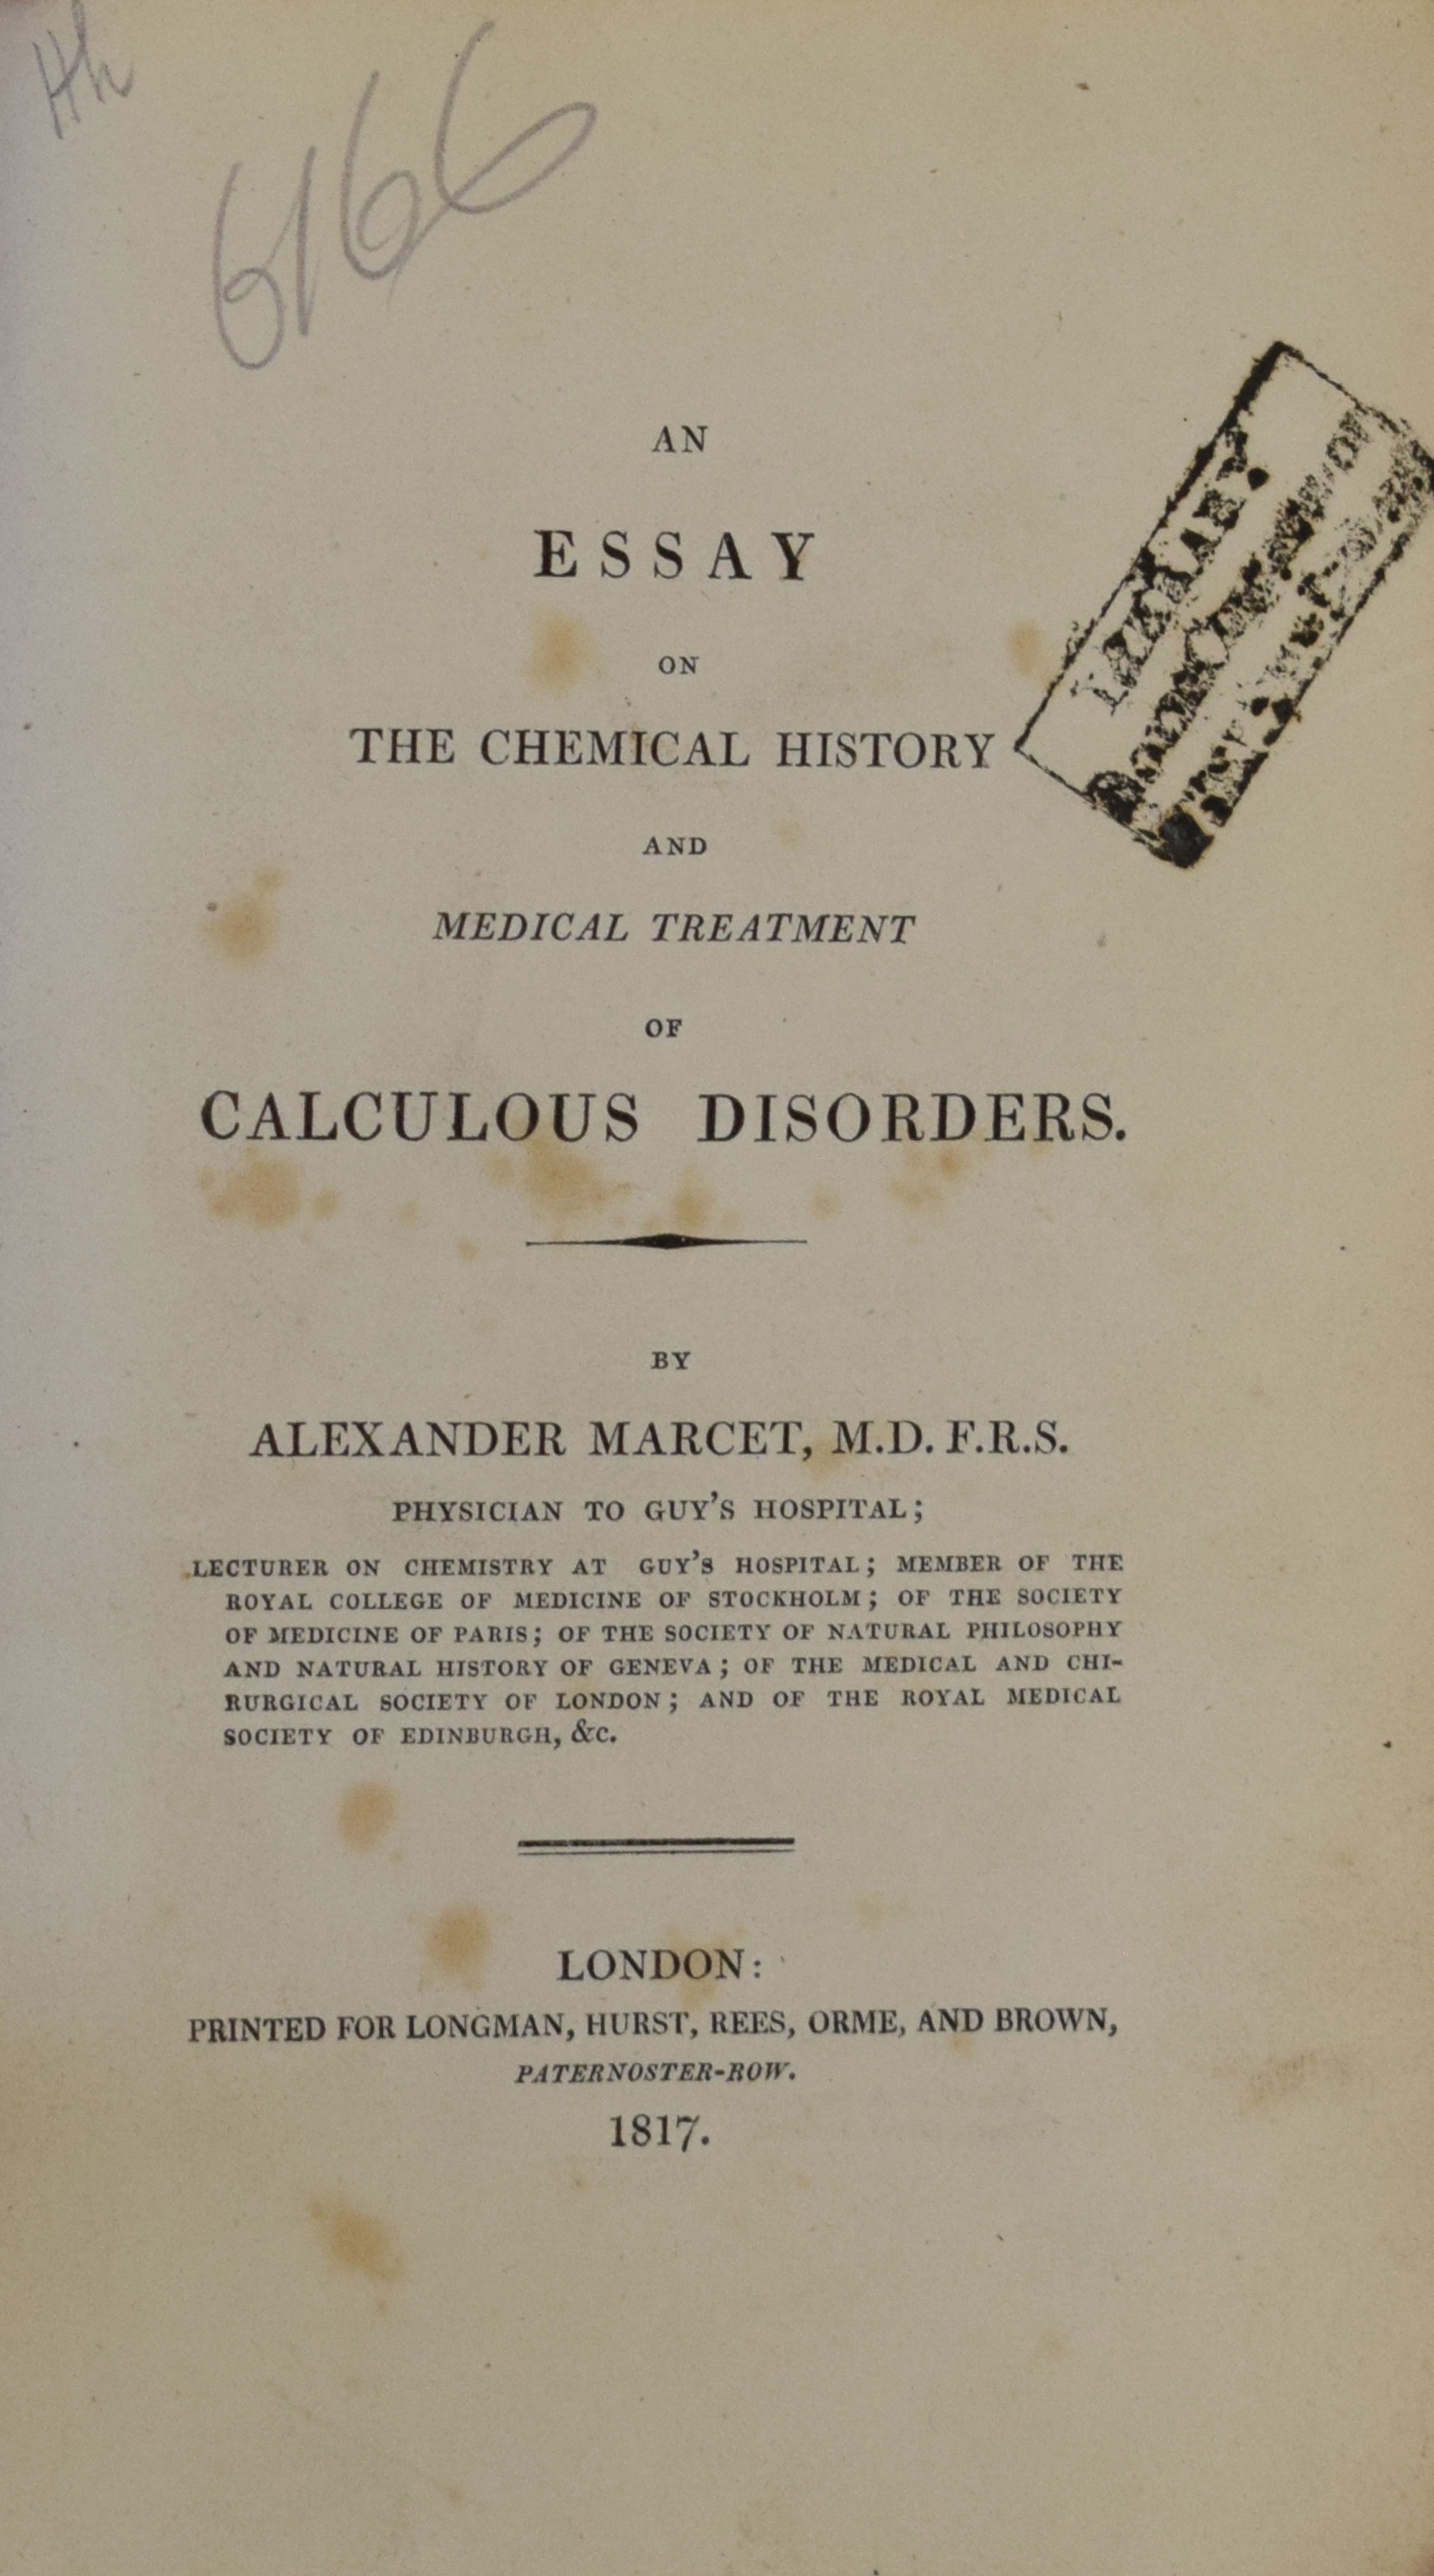 An Essay on the Chemical History and Medical Treatment of Calculous Disorders